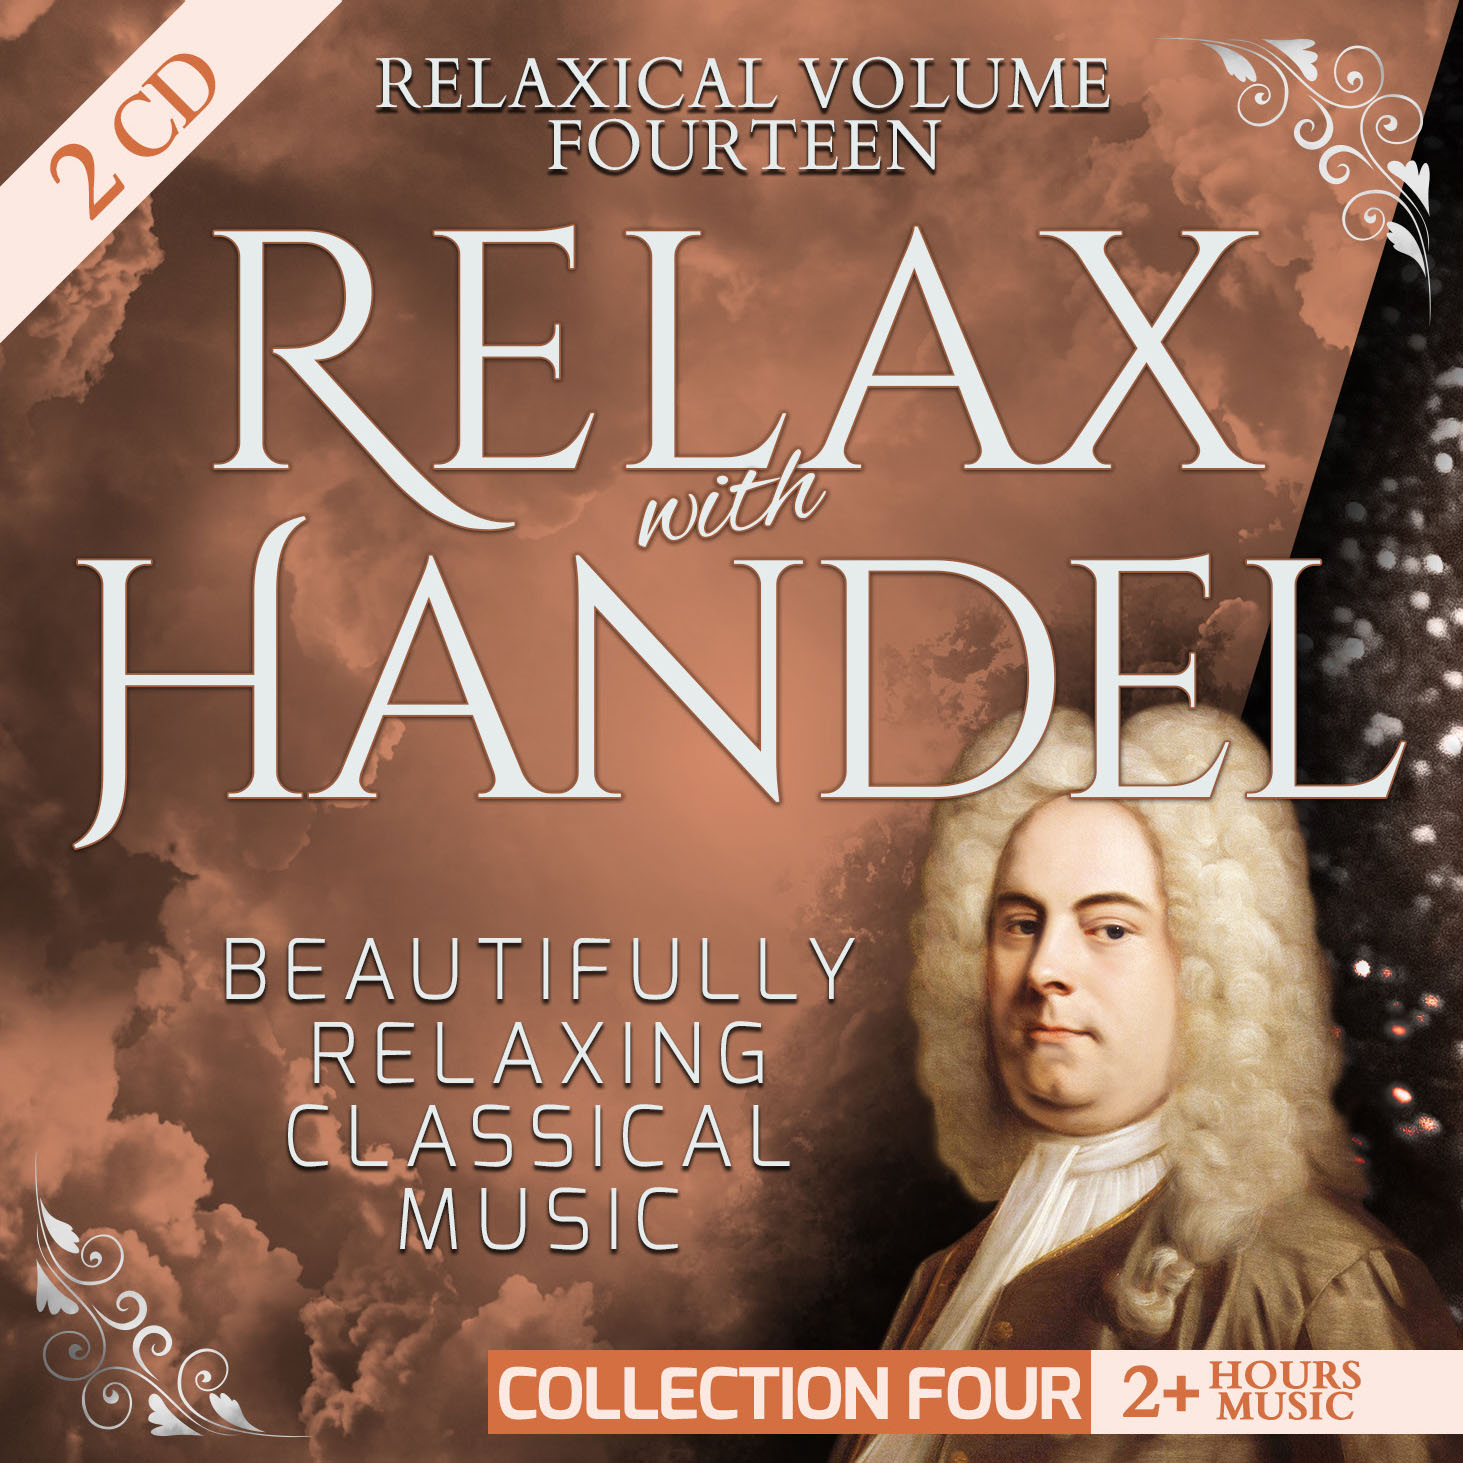 Volume 14 - Relax with Handel (Collection Four): Beautifully Relaxing Classical Music